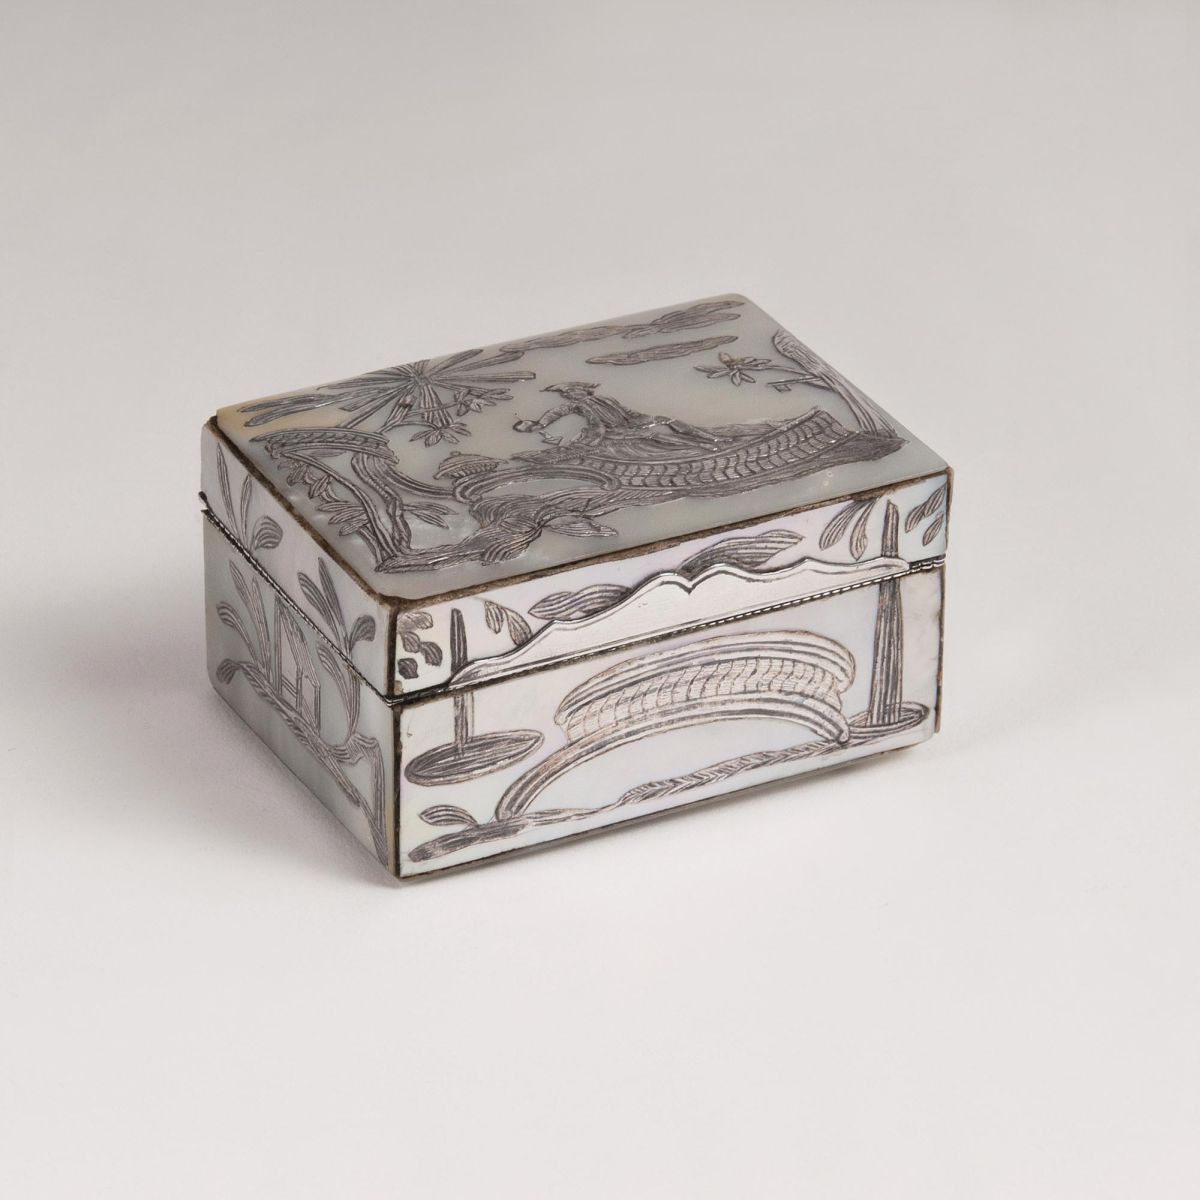 A Nacre Snuff Box with Silver Inlays